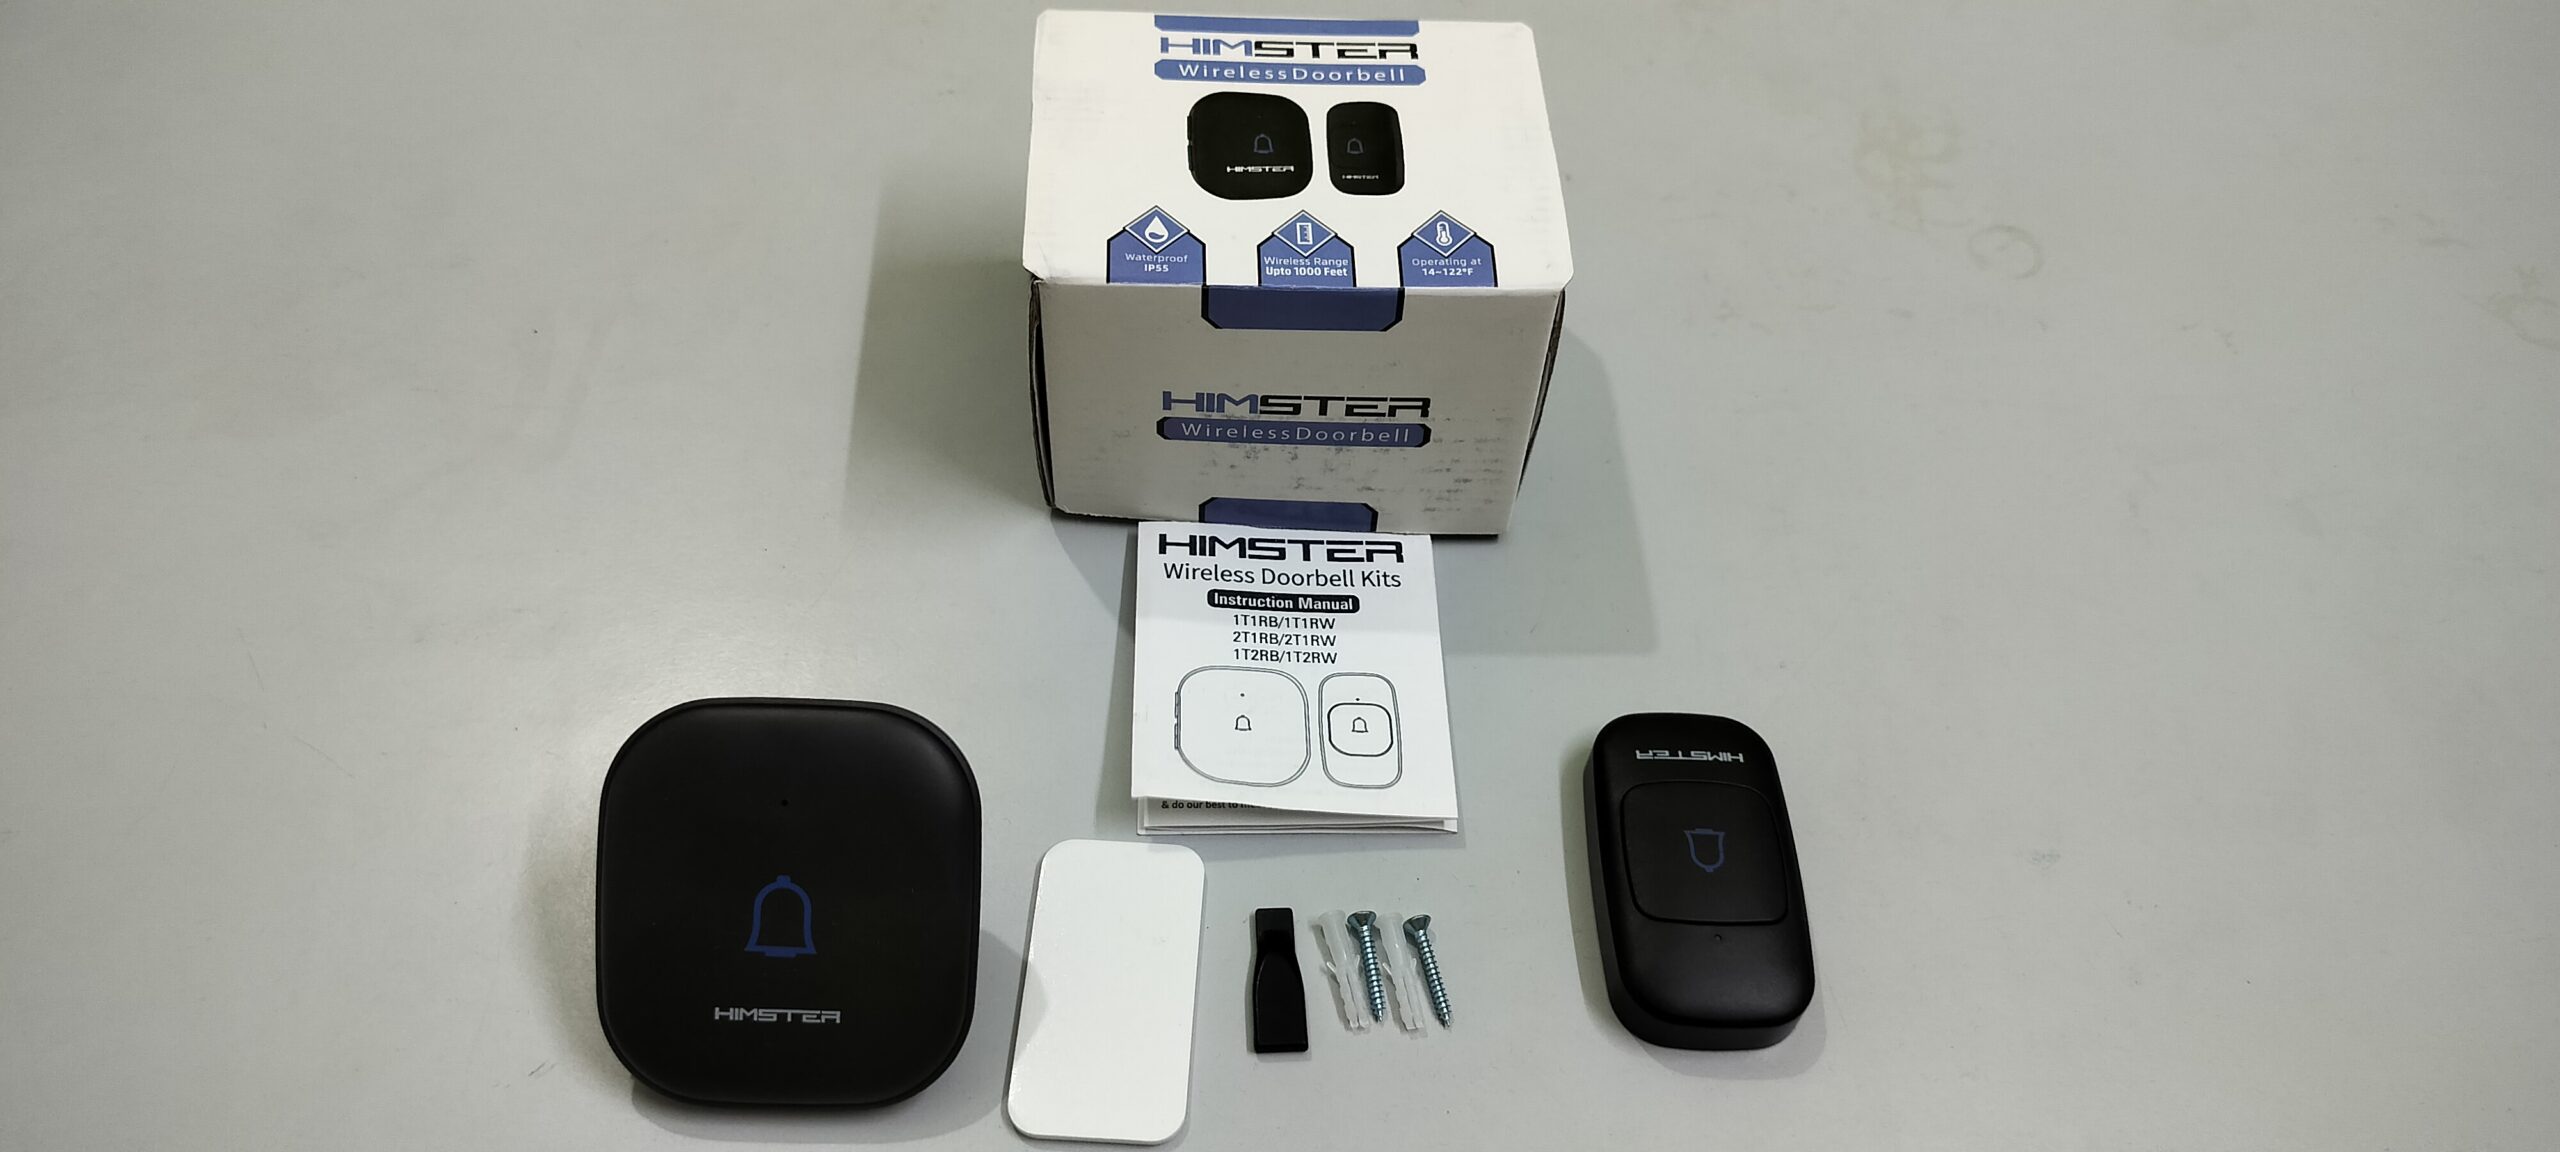 Himster Wireless Doorbell box items scaled